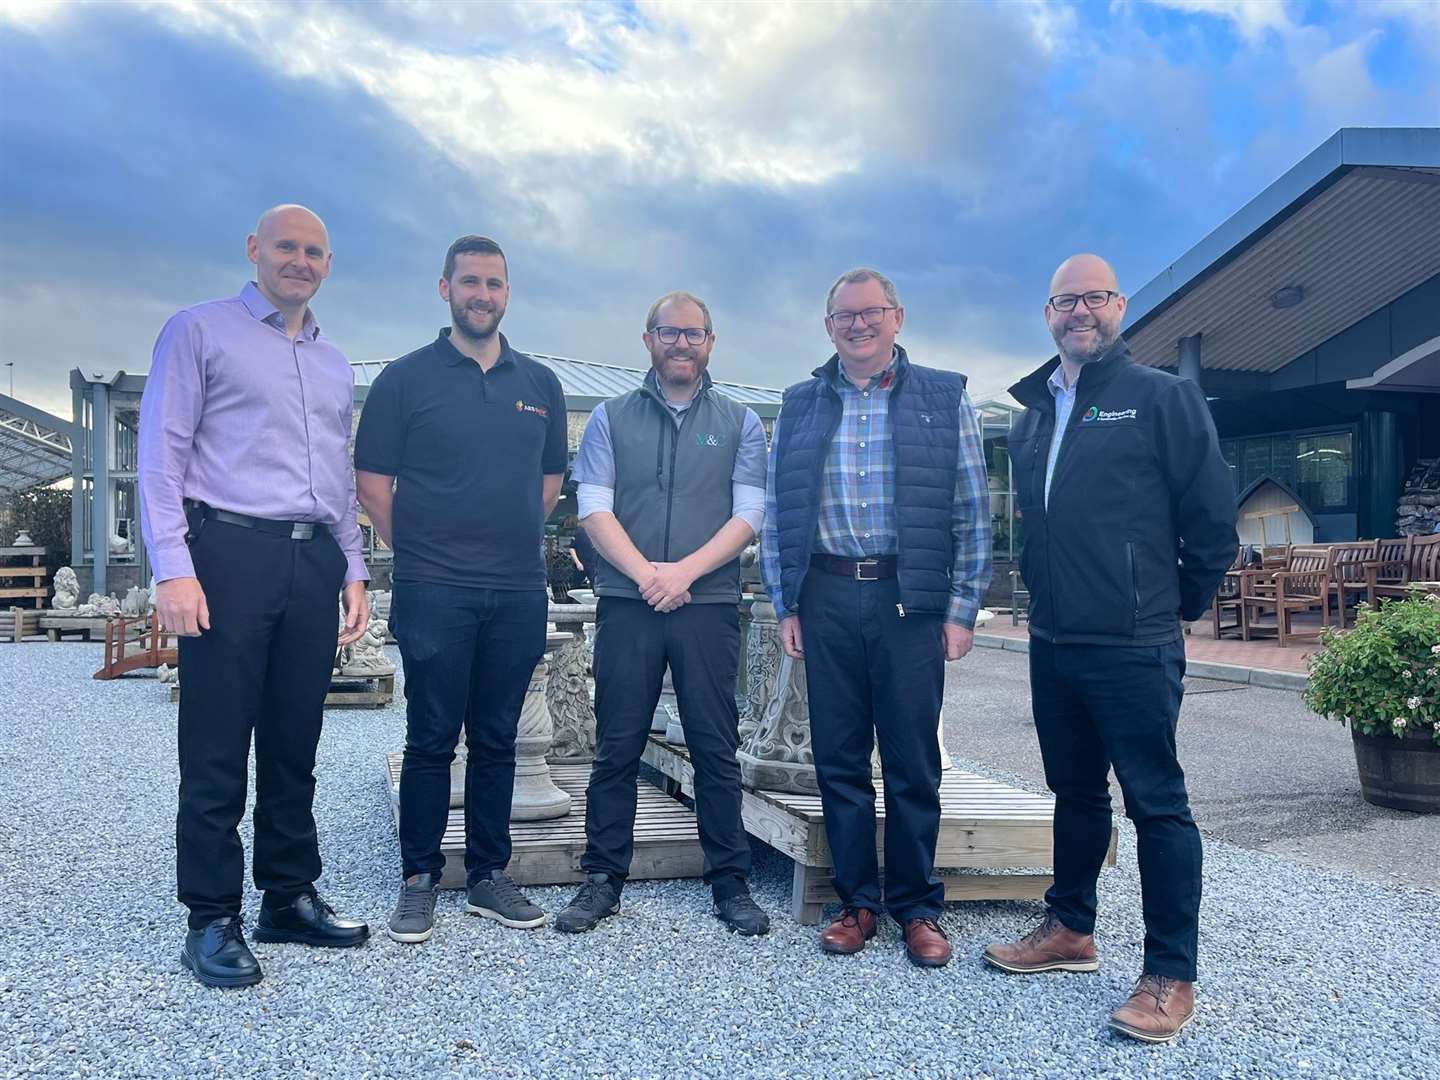 Director at Mcdonald & Munro, Miguel Gomez, engineering manager at AES Solar, Matthew Milne, Ali and Peter Wilson, and Allan Martin, project manager with AJ Engineering.